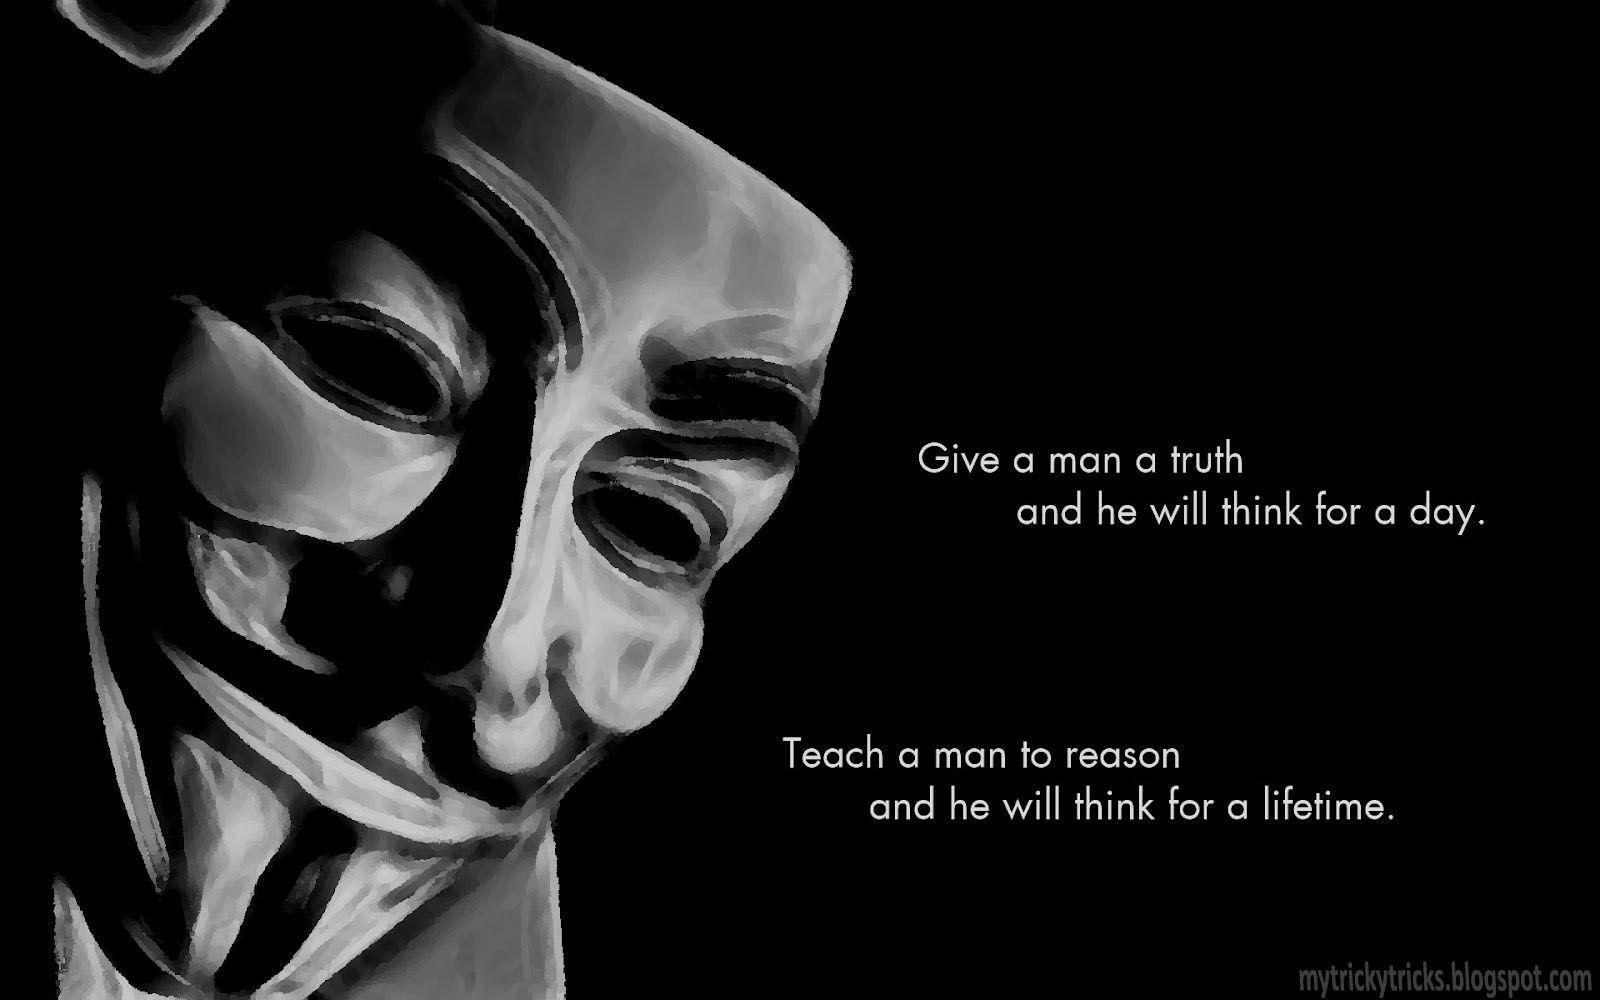 Wallpaper For > Anonymous Hacking Wallpaper